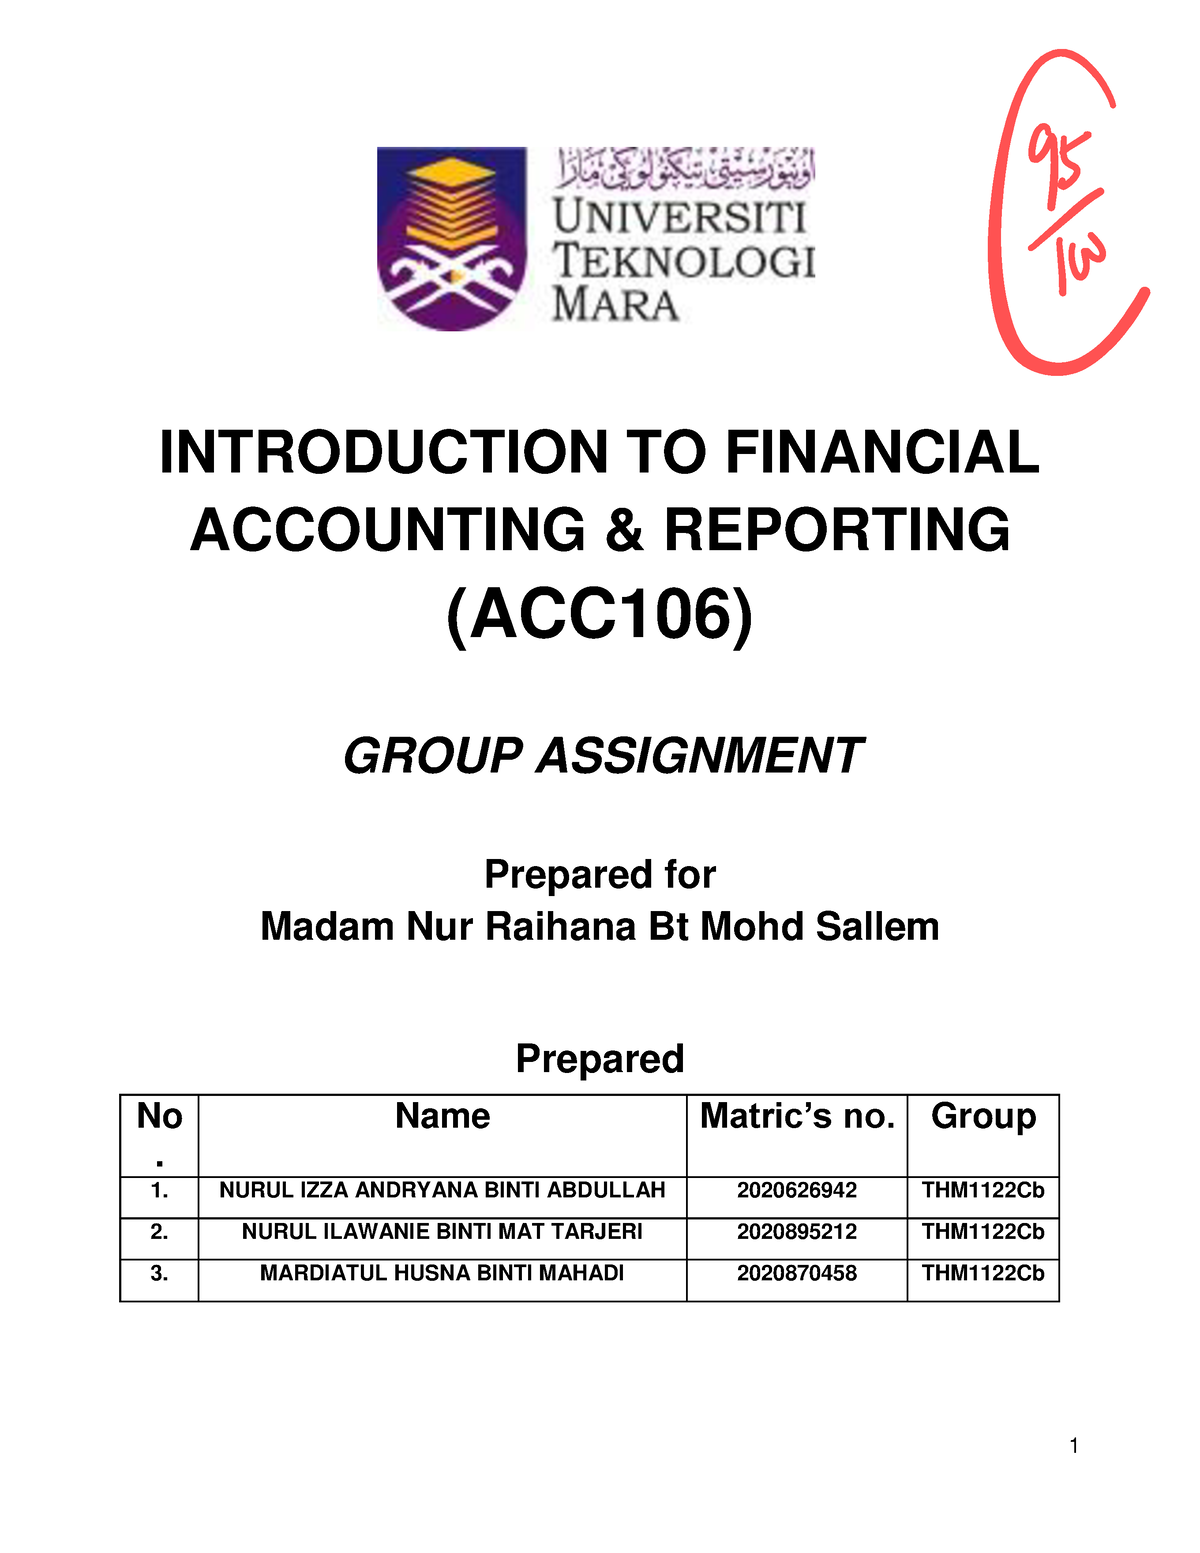 group assignment acc106 uitm